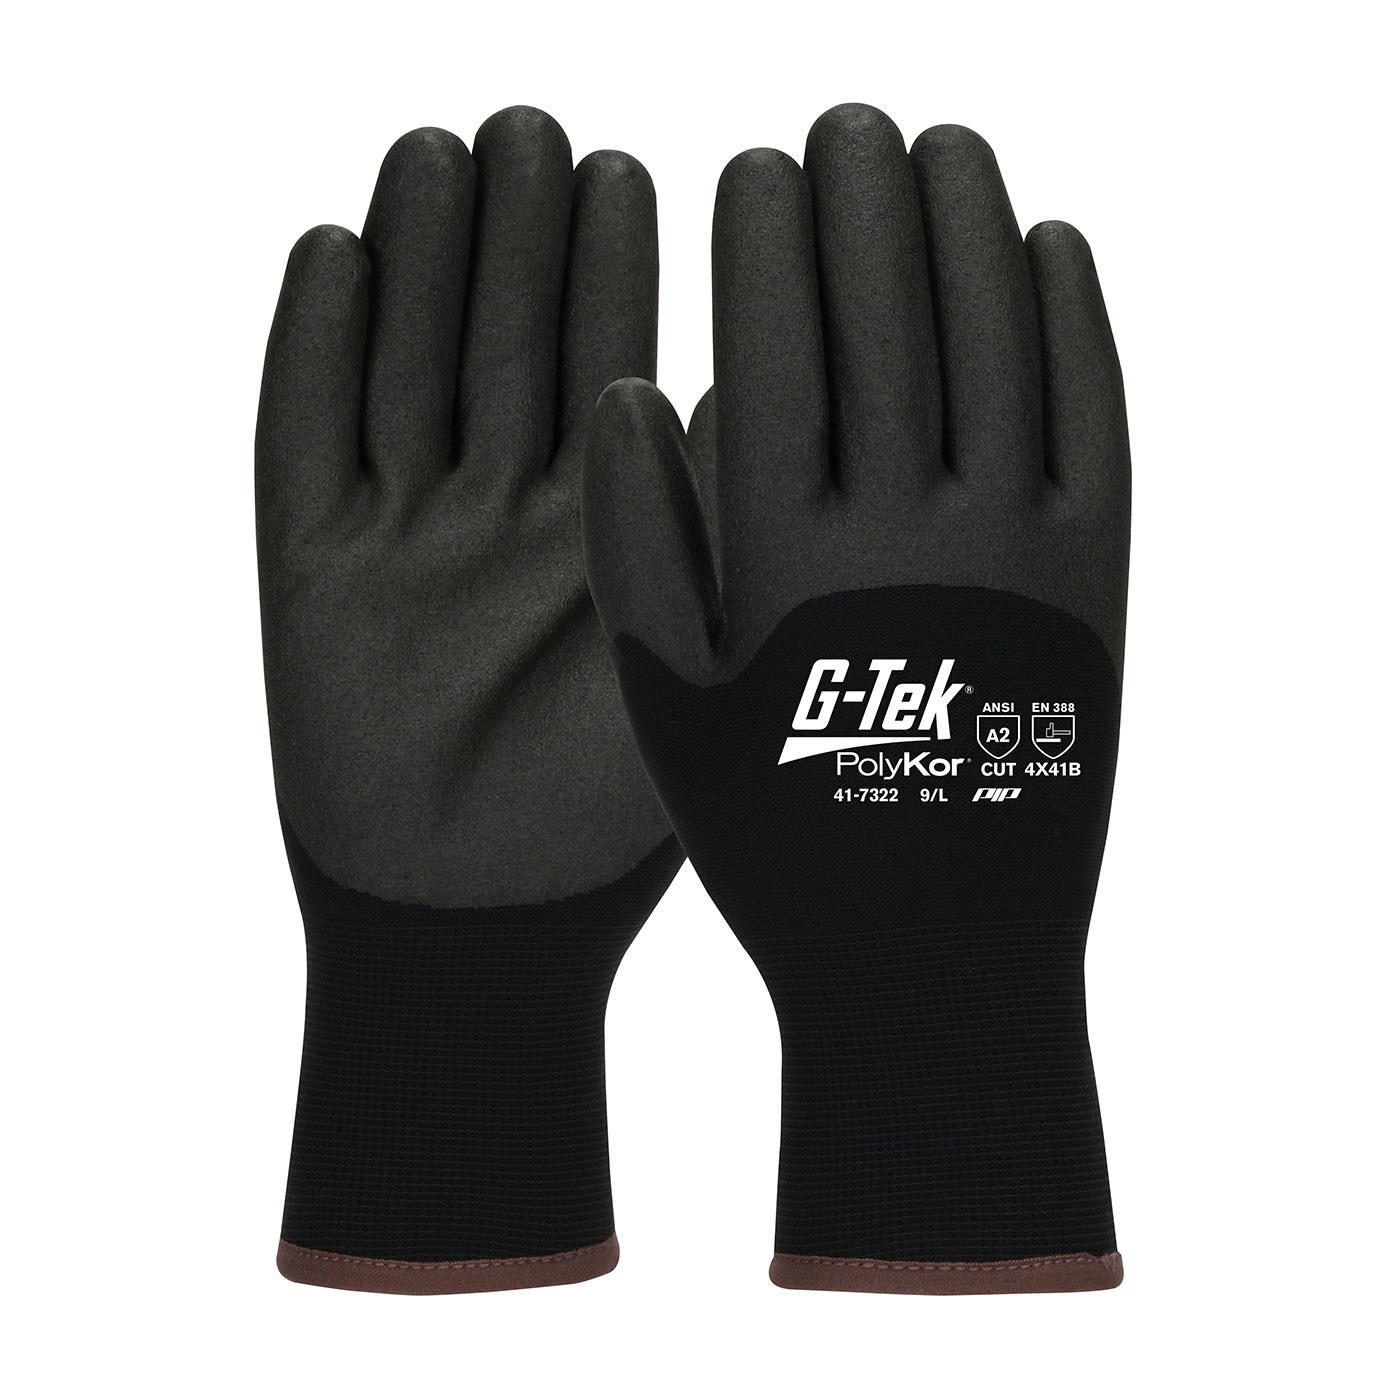 G-Tek® PolyKor® Seamless Knit PolyKor® Blended Glove with Acrylic Lining and Double-Dipped PVC Coated Foam Grip on Palm, Fingers & Knuckles  (#41-7322)